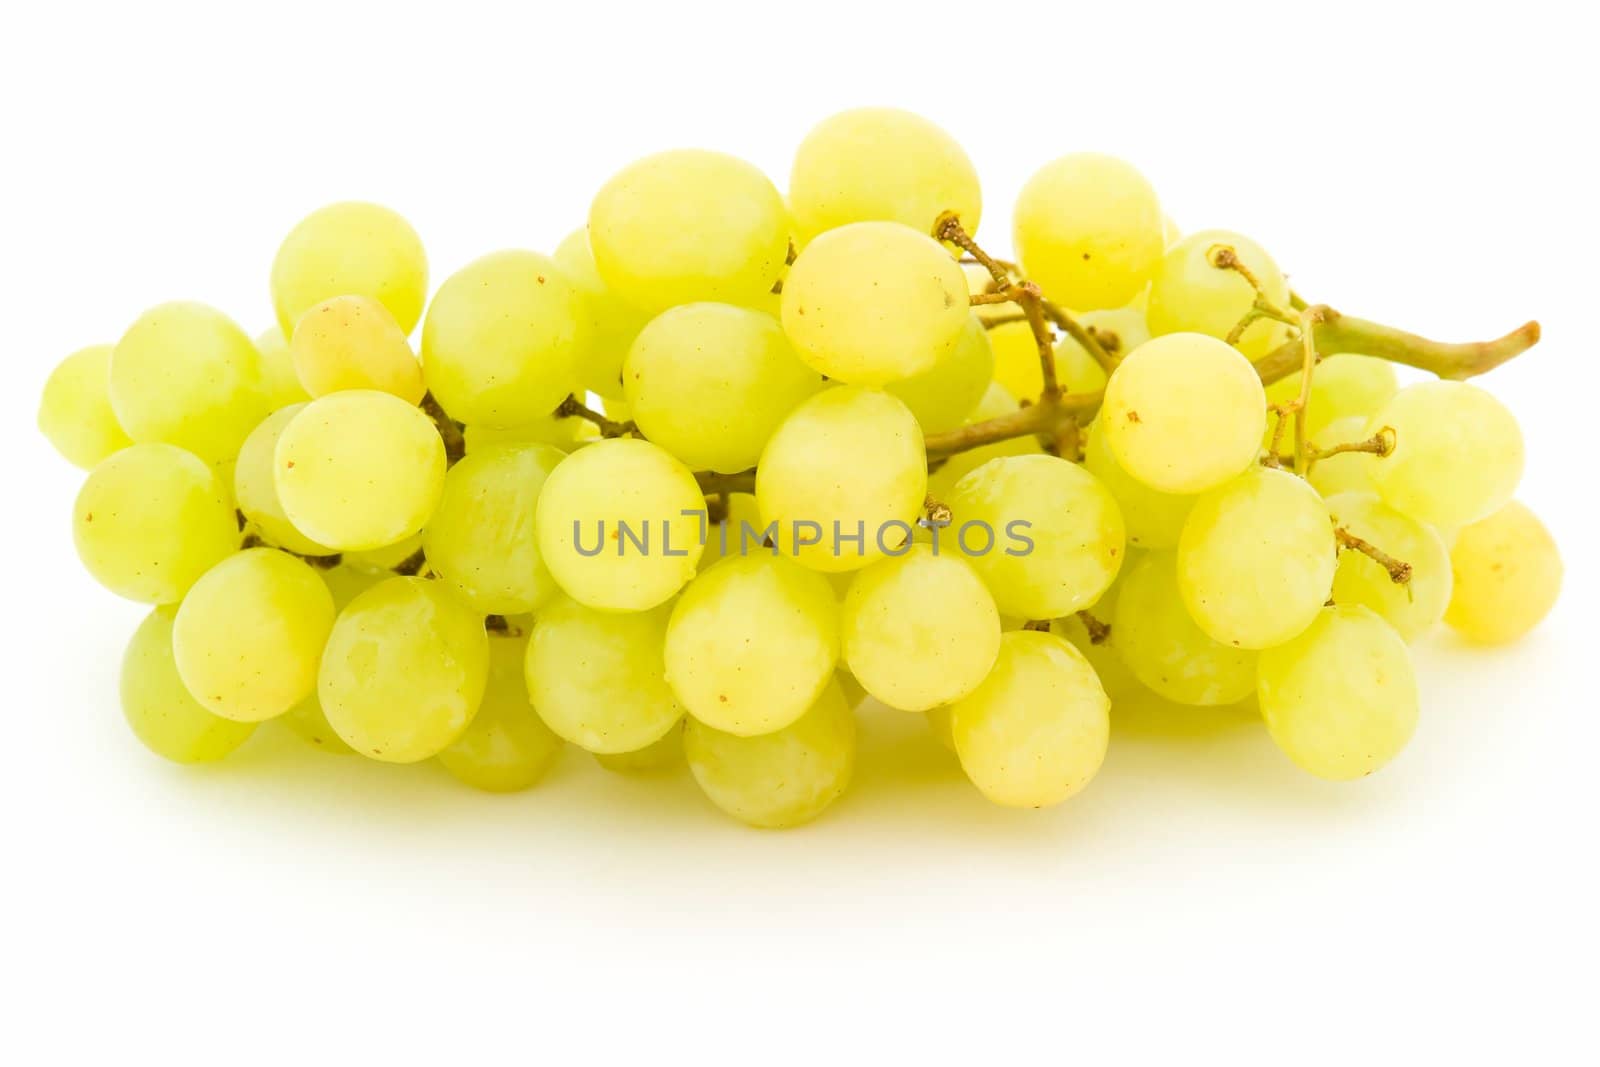 Bunch of grapes on a white background